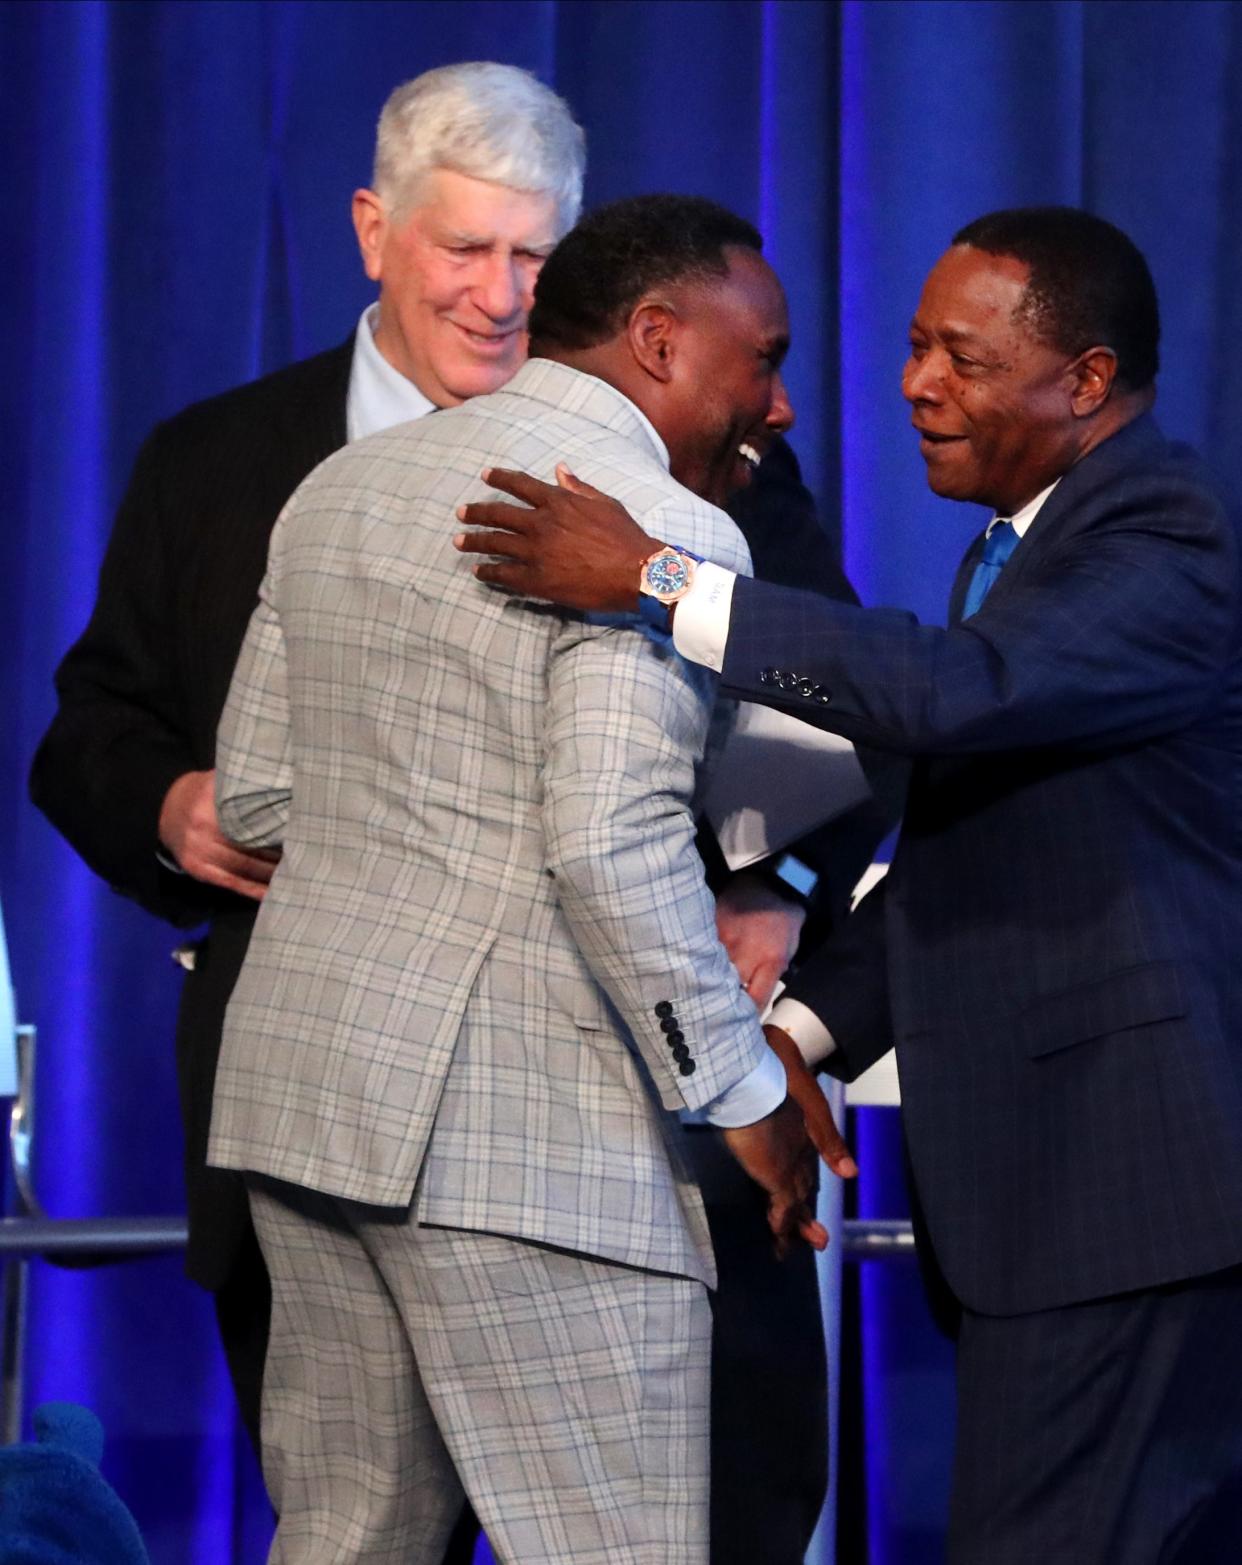 MTSU Director of Athletics Chris Massaro, left, looks on as the new MTSU head football coach Derek Mason, center gets a hug from MTSU President Sidney McPhee, right as MTSU officially announces Derek Mason, the former Vanderbilt head football coach as the new MTSU head football coach on Wednesday, Dec. 6, 2023, during a press conference in the Student Union Building on campus.